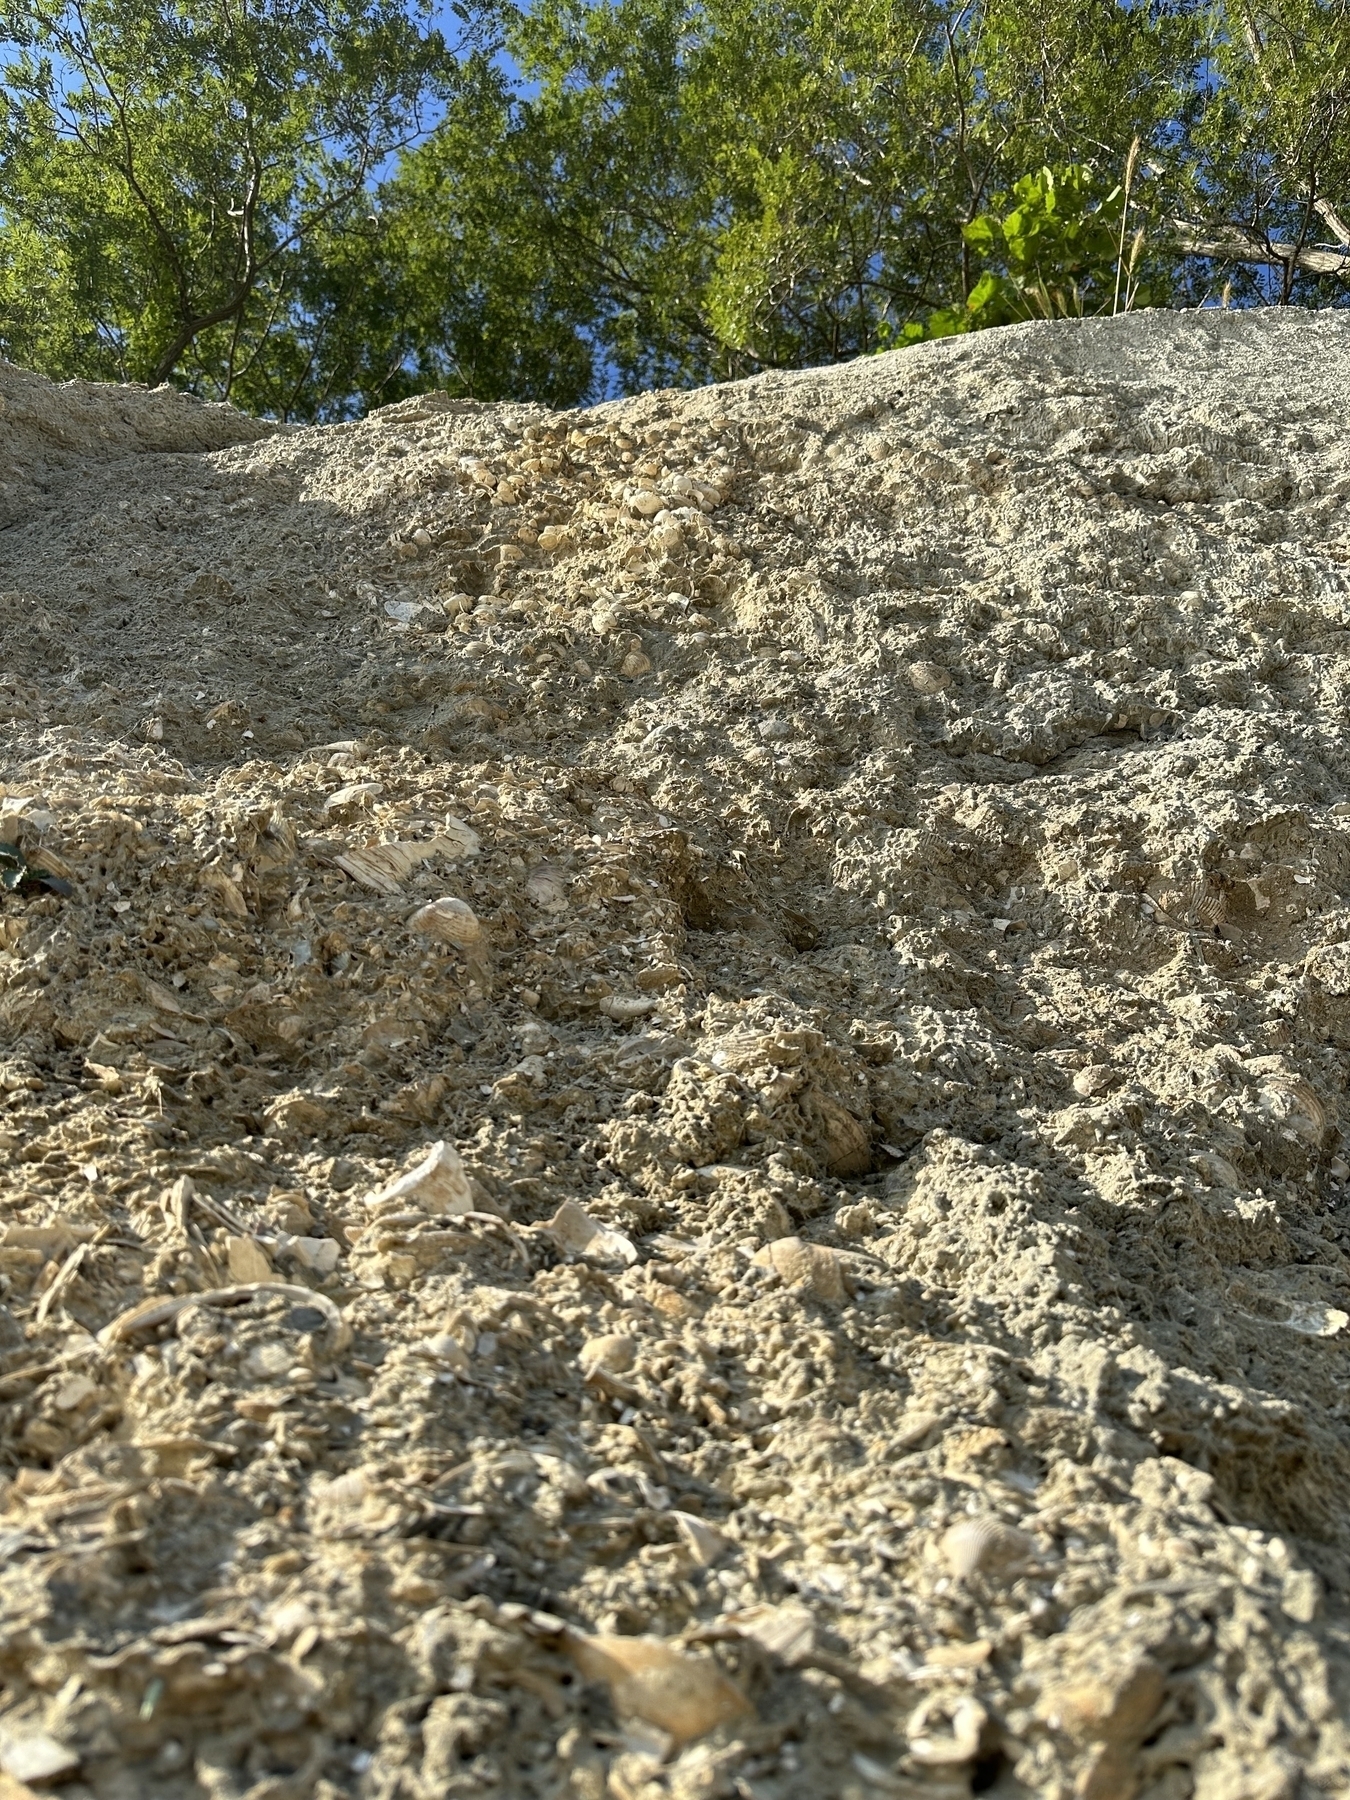 Photo of a sandy cliff face with embedded fossils and sediment visible.